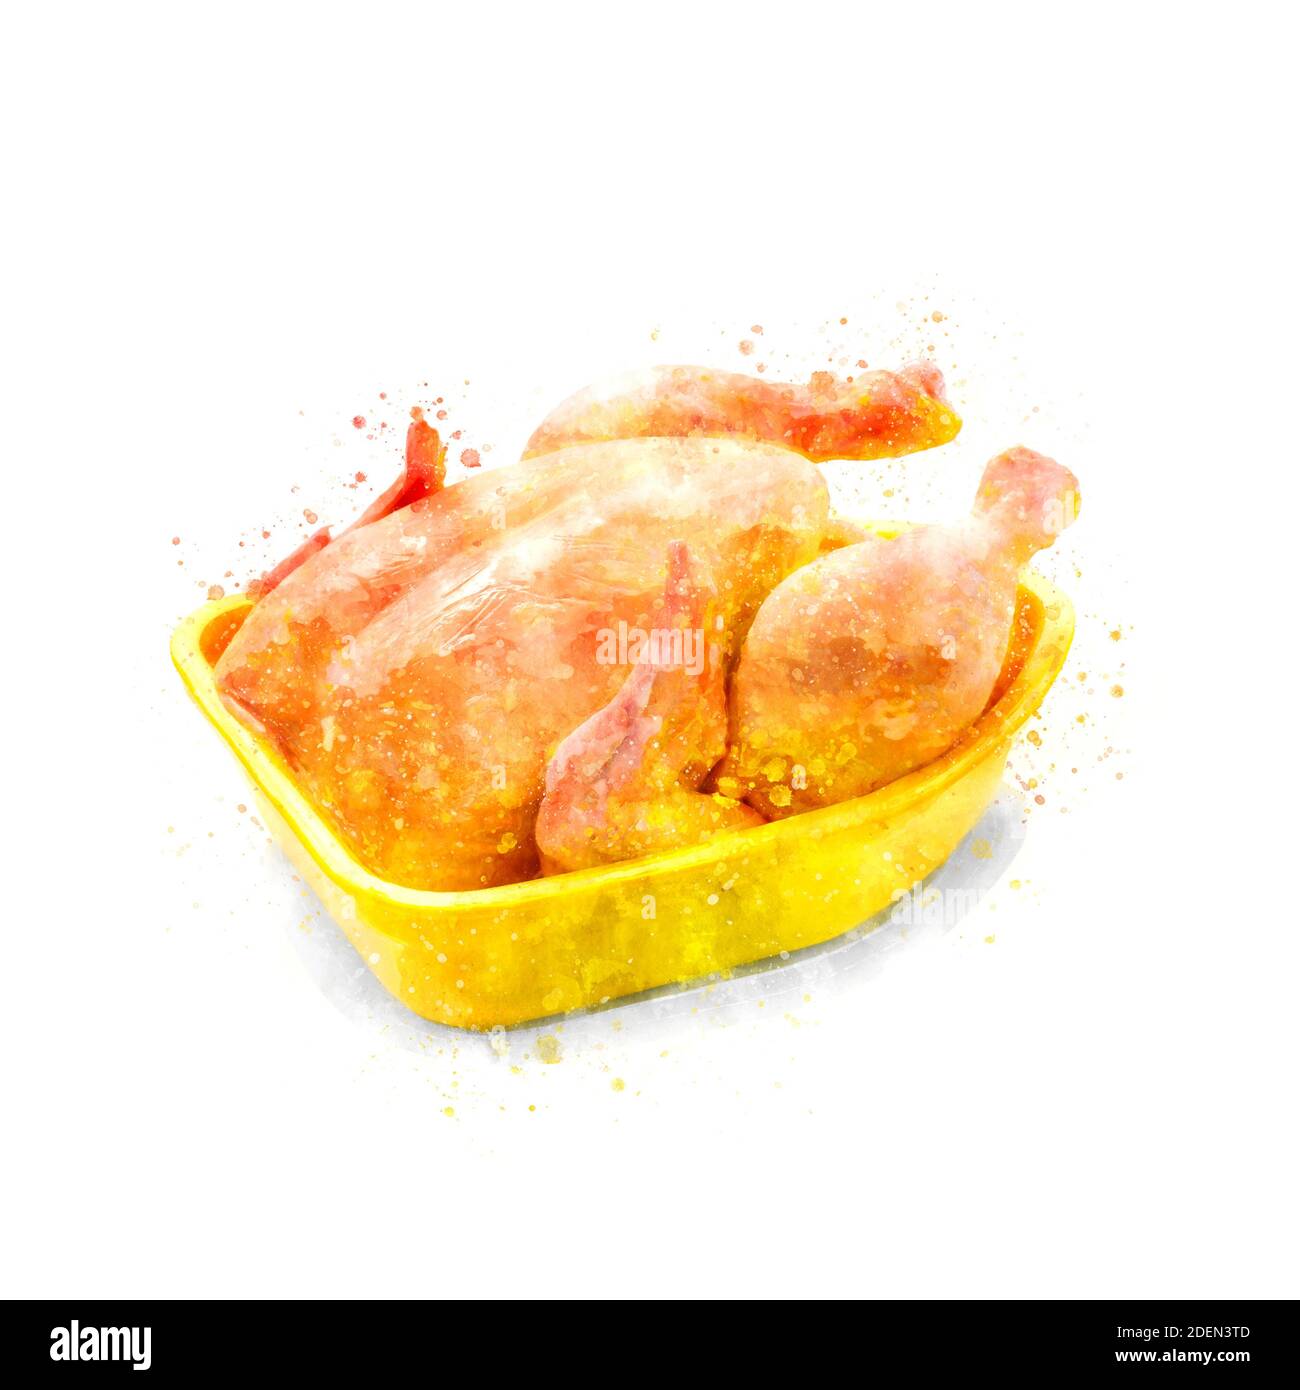 Corn-fed chicken in yellow packaging tray as watercolor illustration Stock Photo